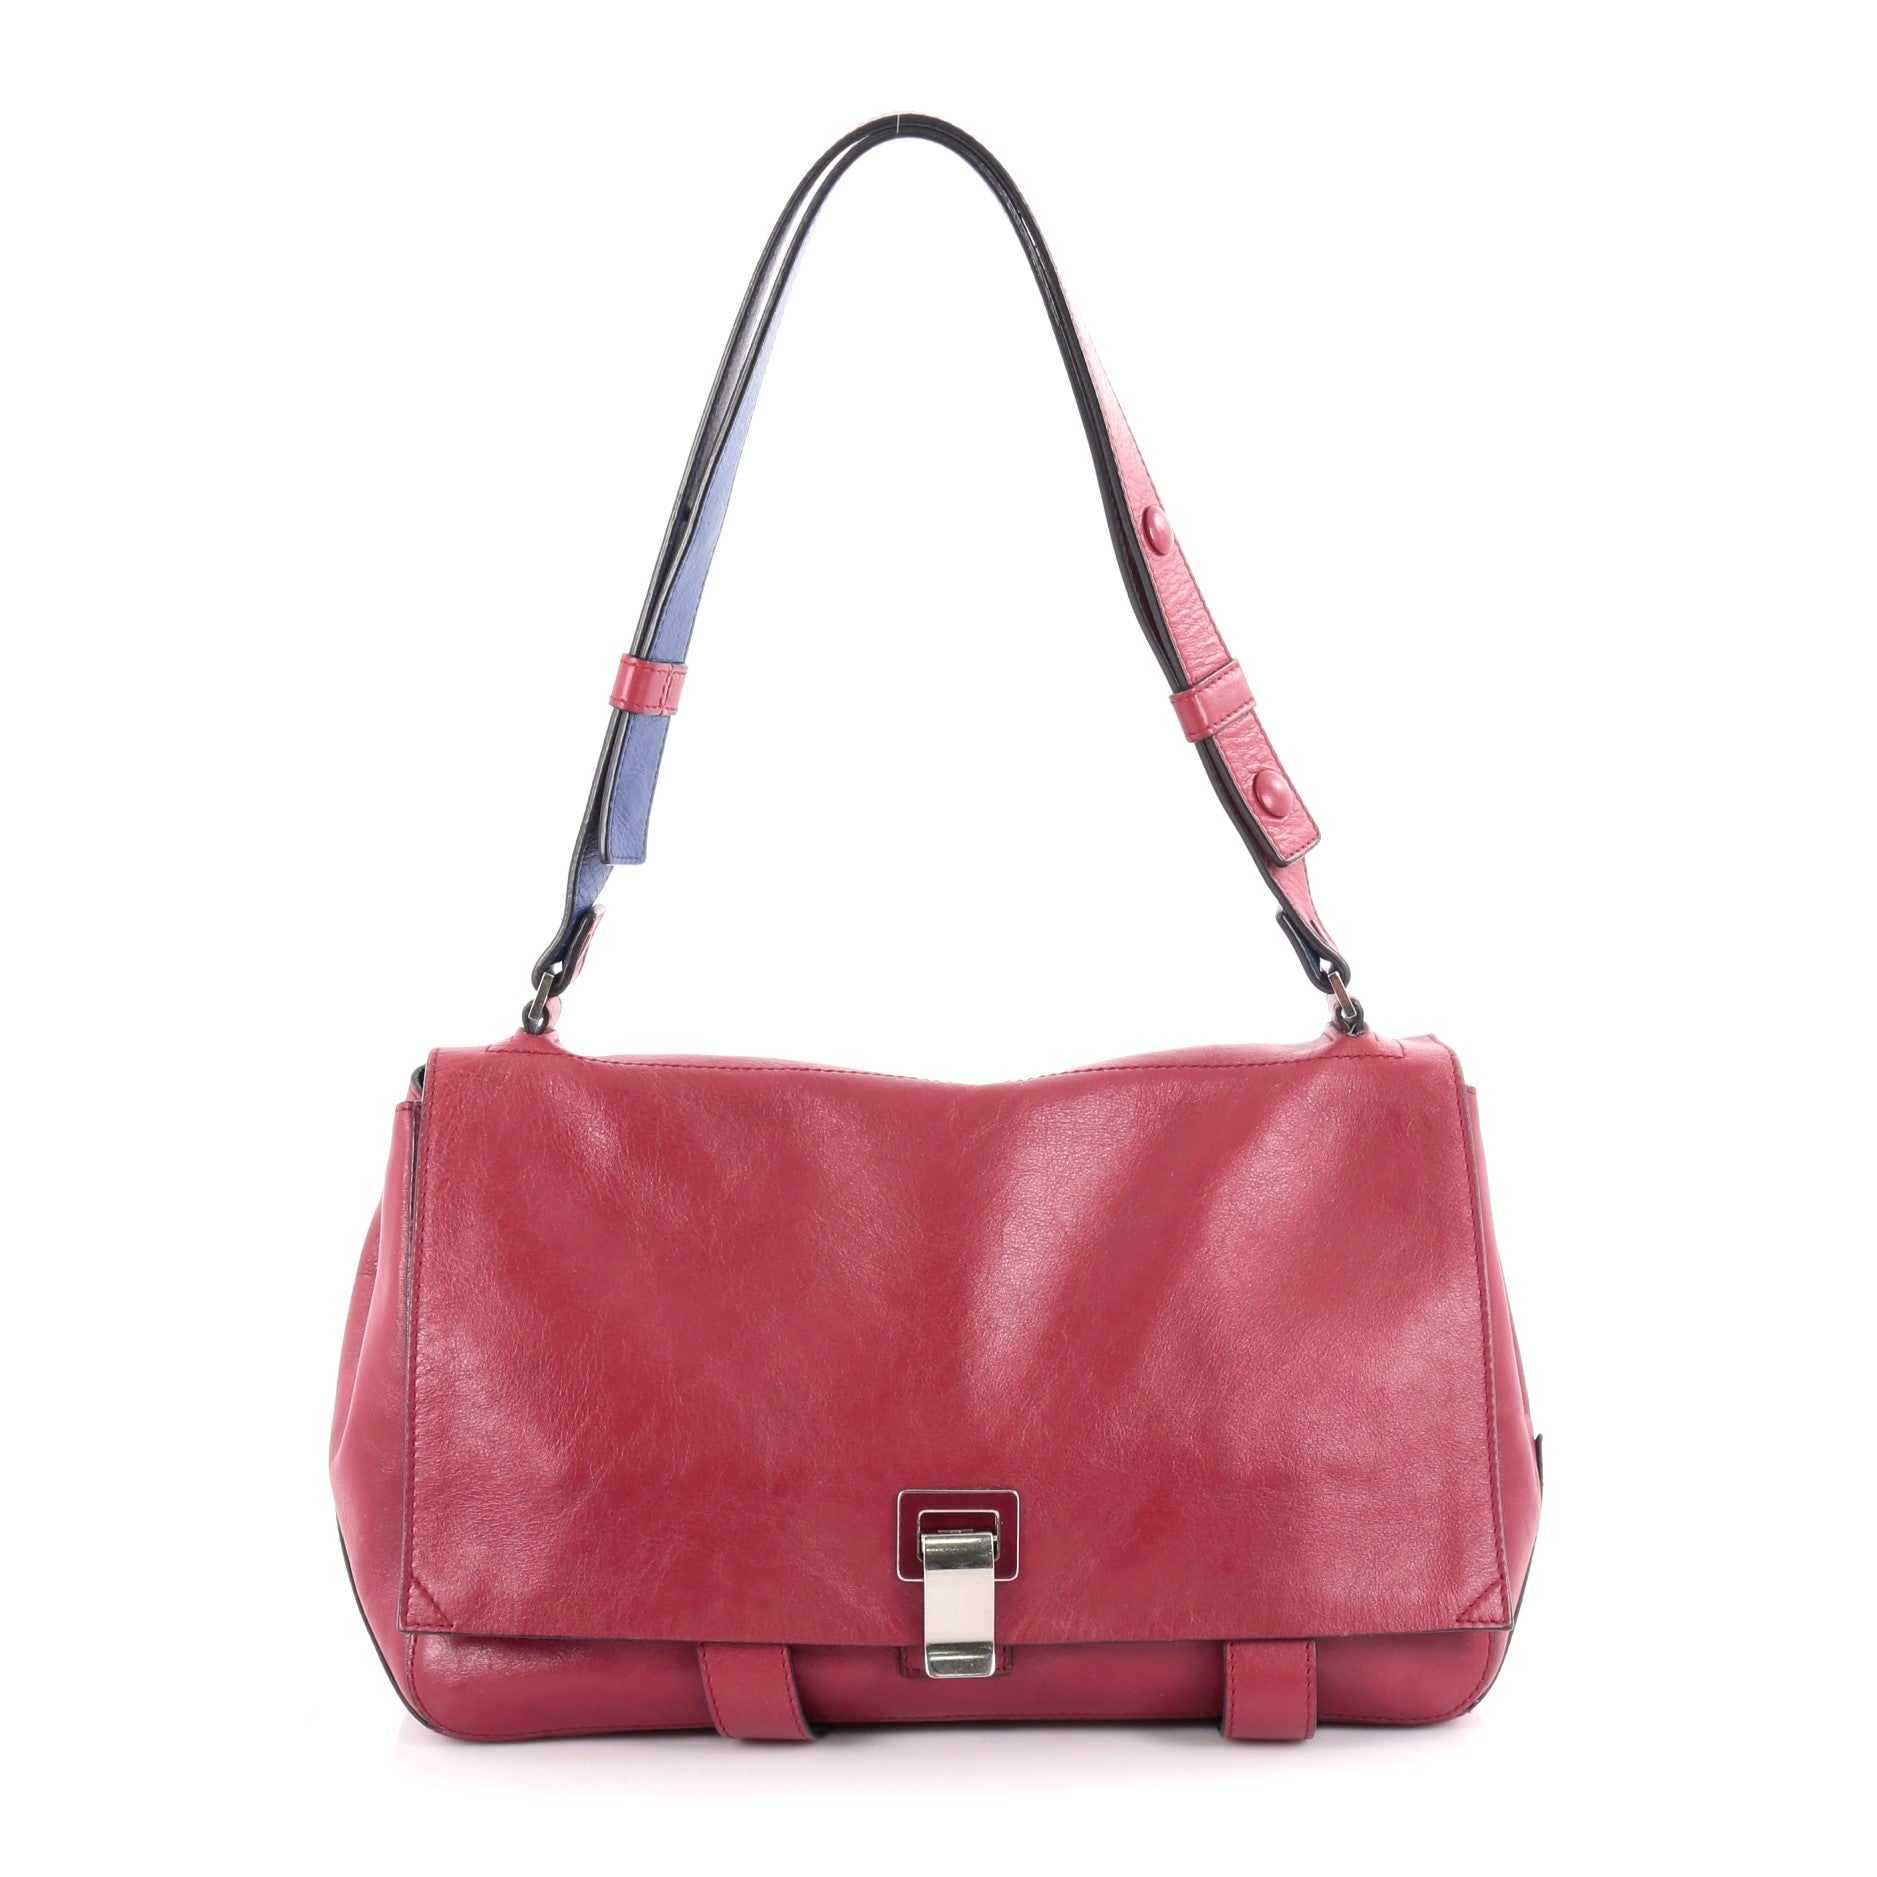 Hermes Bougainvillea/Fauve Canvas and Leather Herbag Zip 39 Bag at